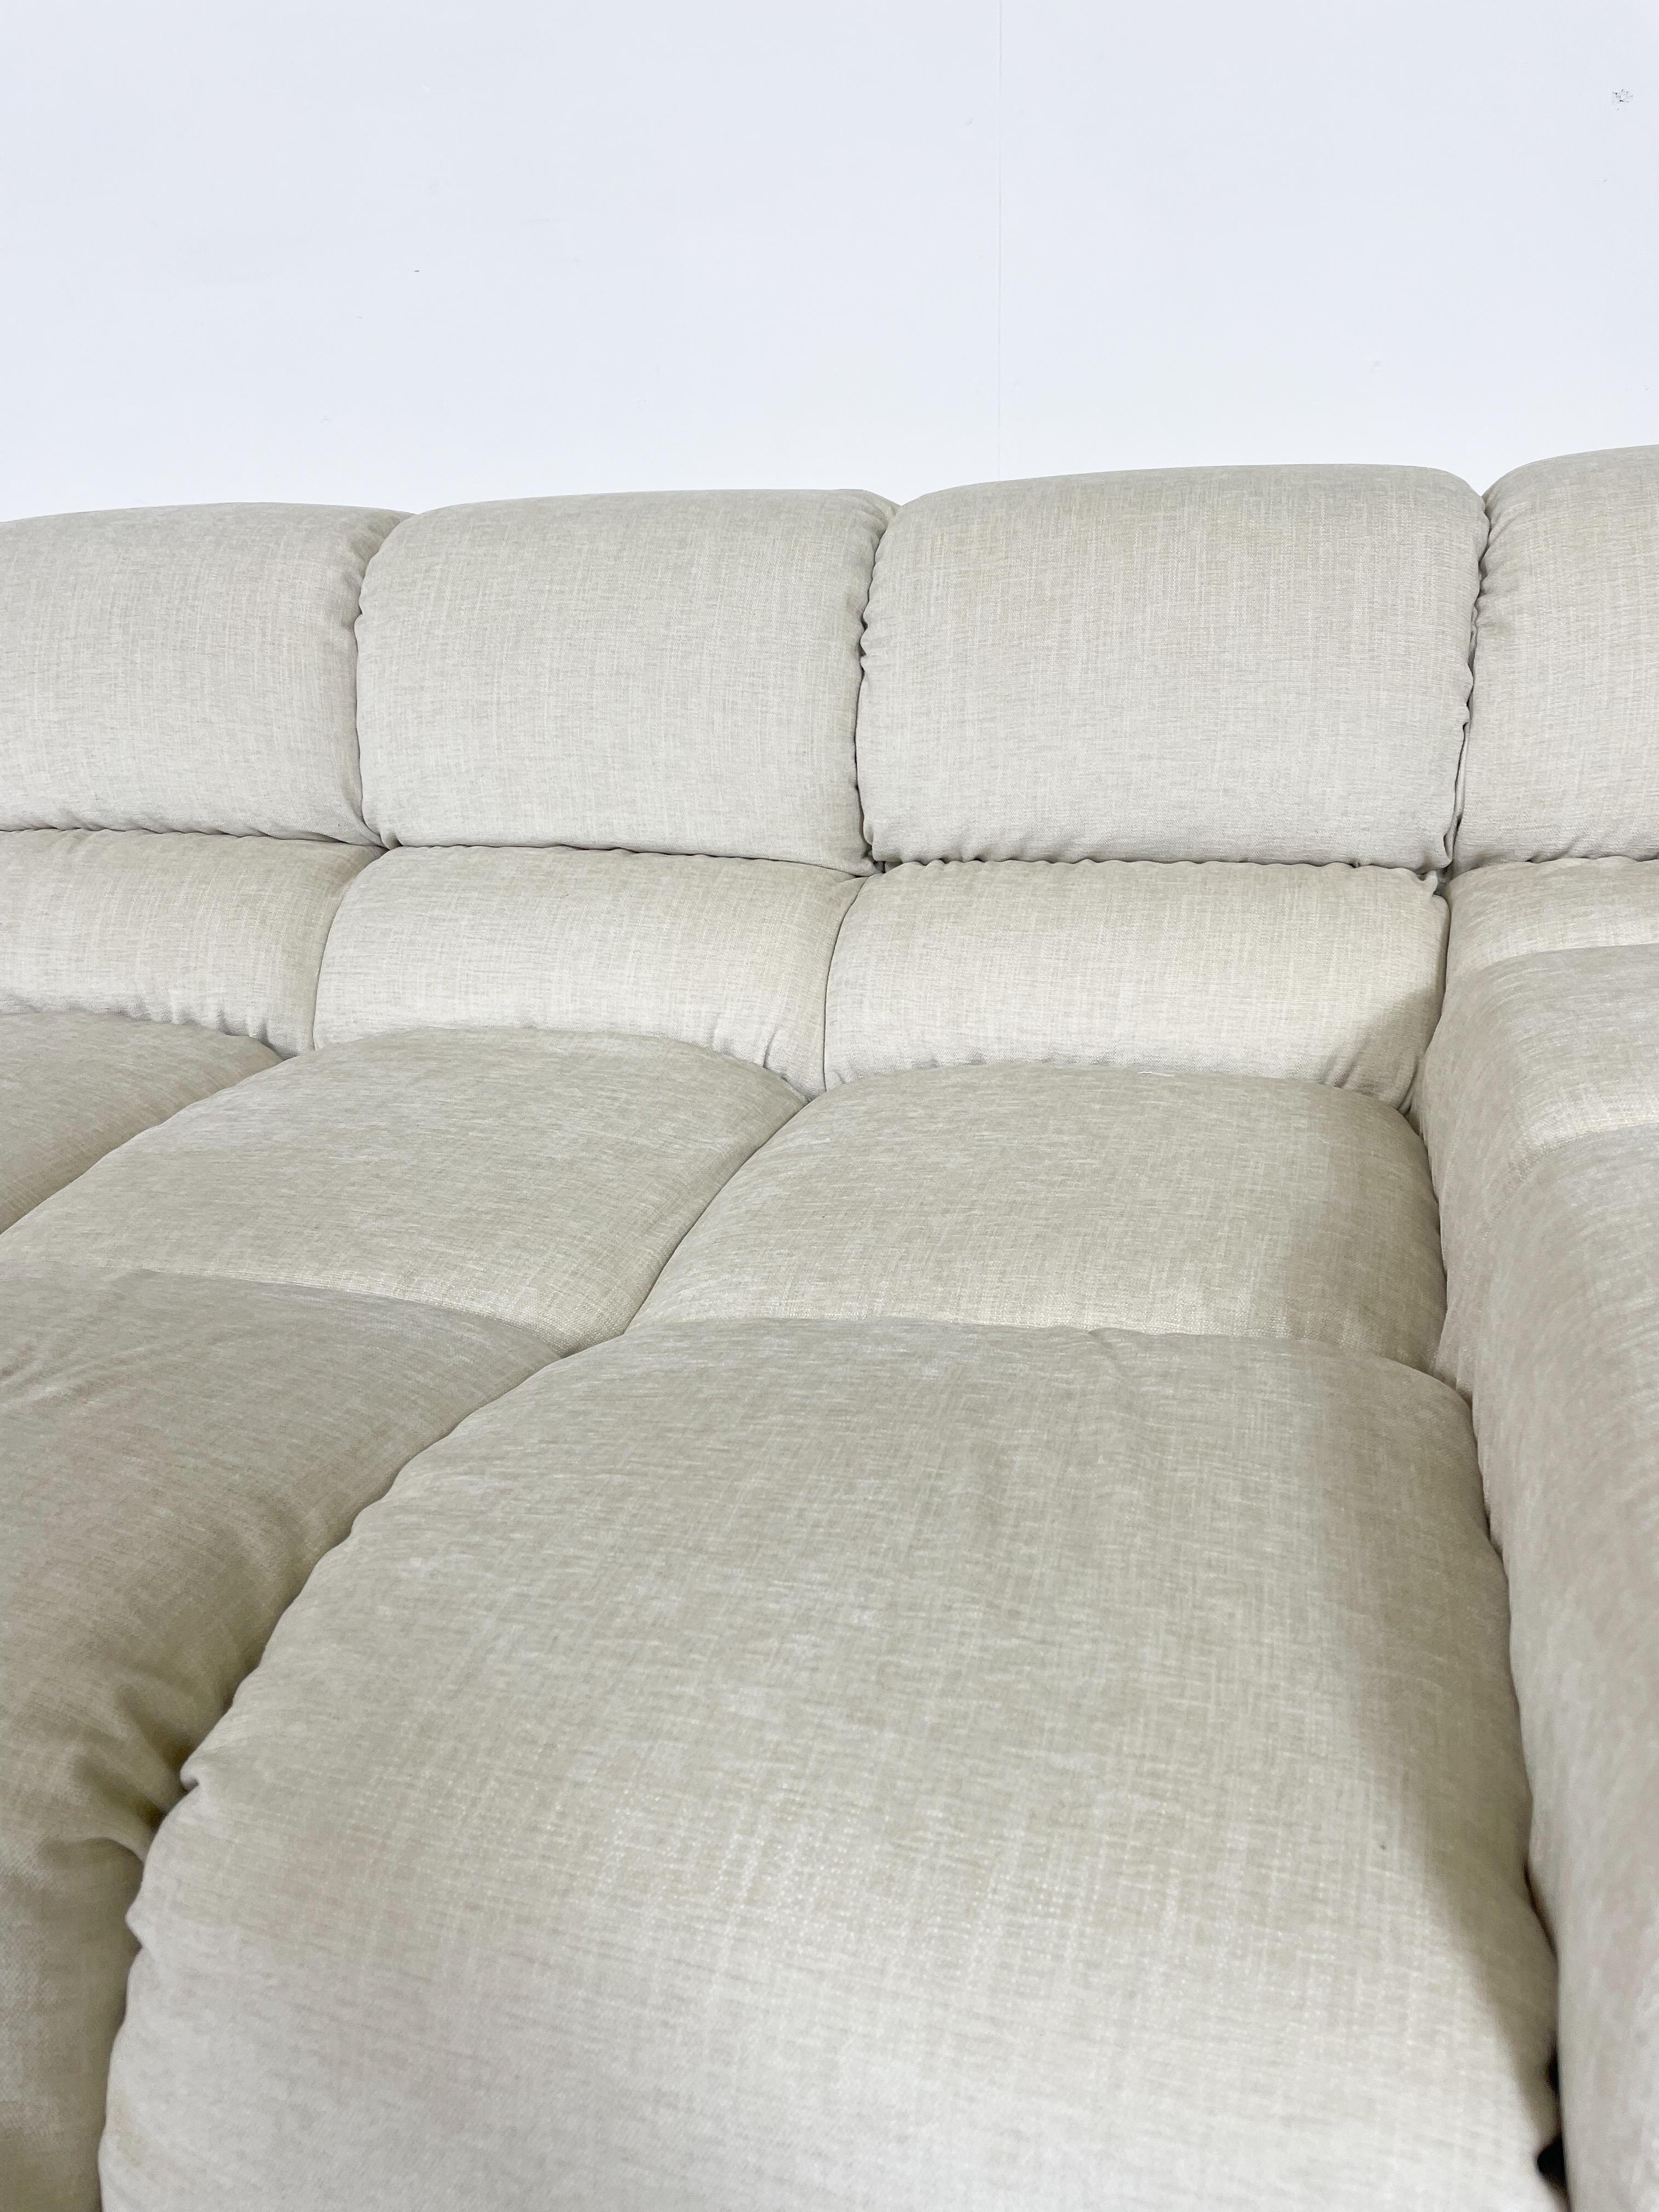 Tufty-Time Sofa by Patricia Urquiola for B & B Italia - New Upholstery In Good Condition For Sale In Brussels, BE